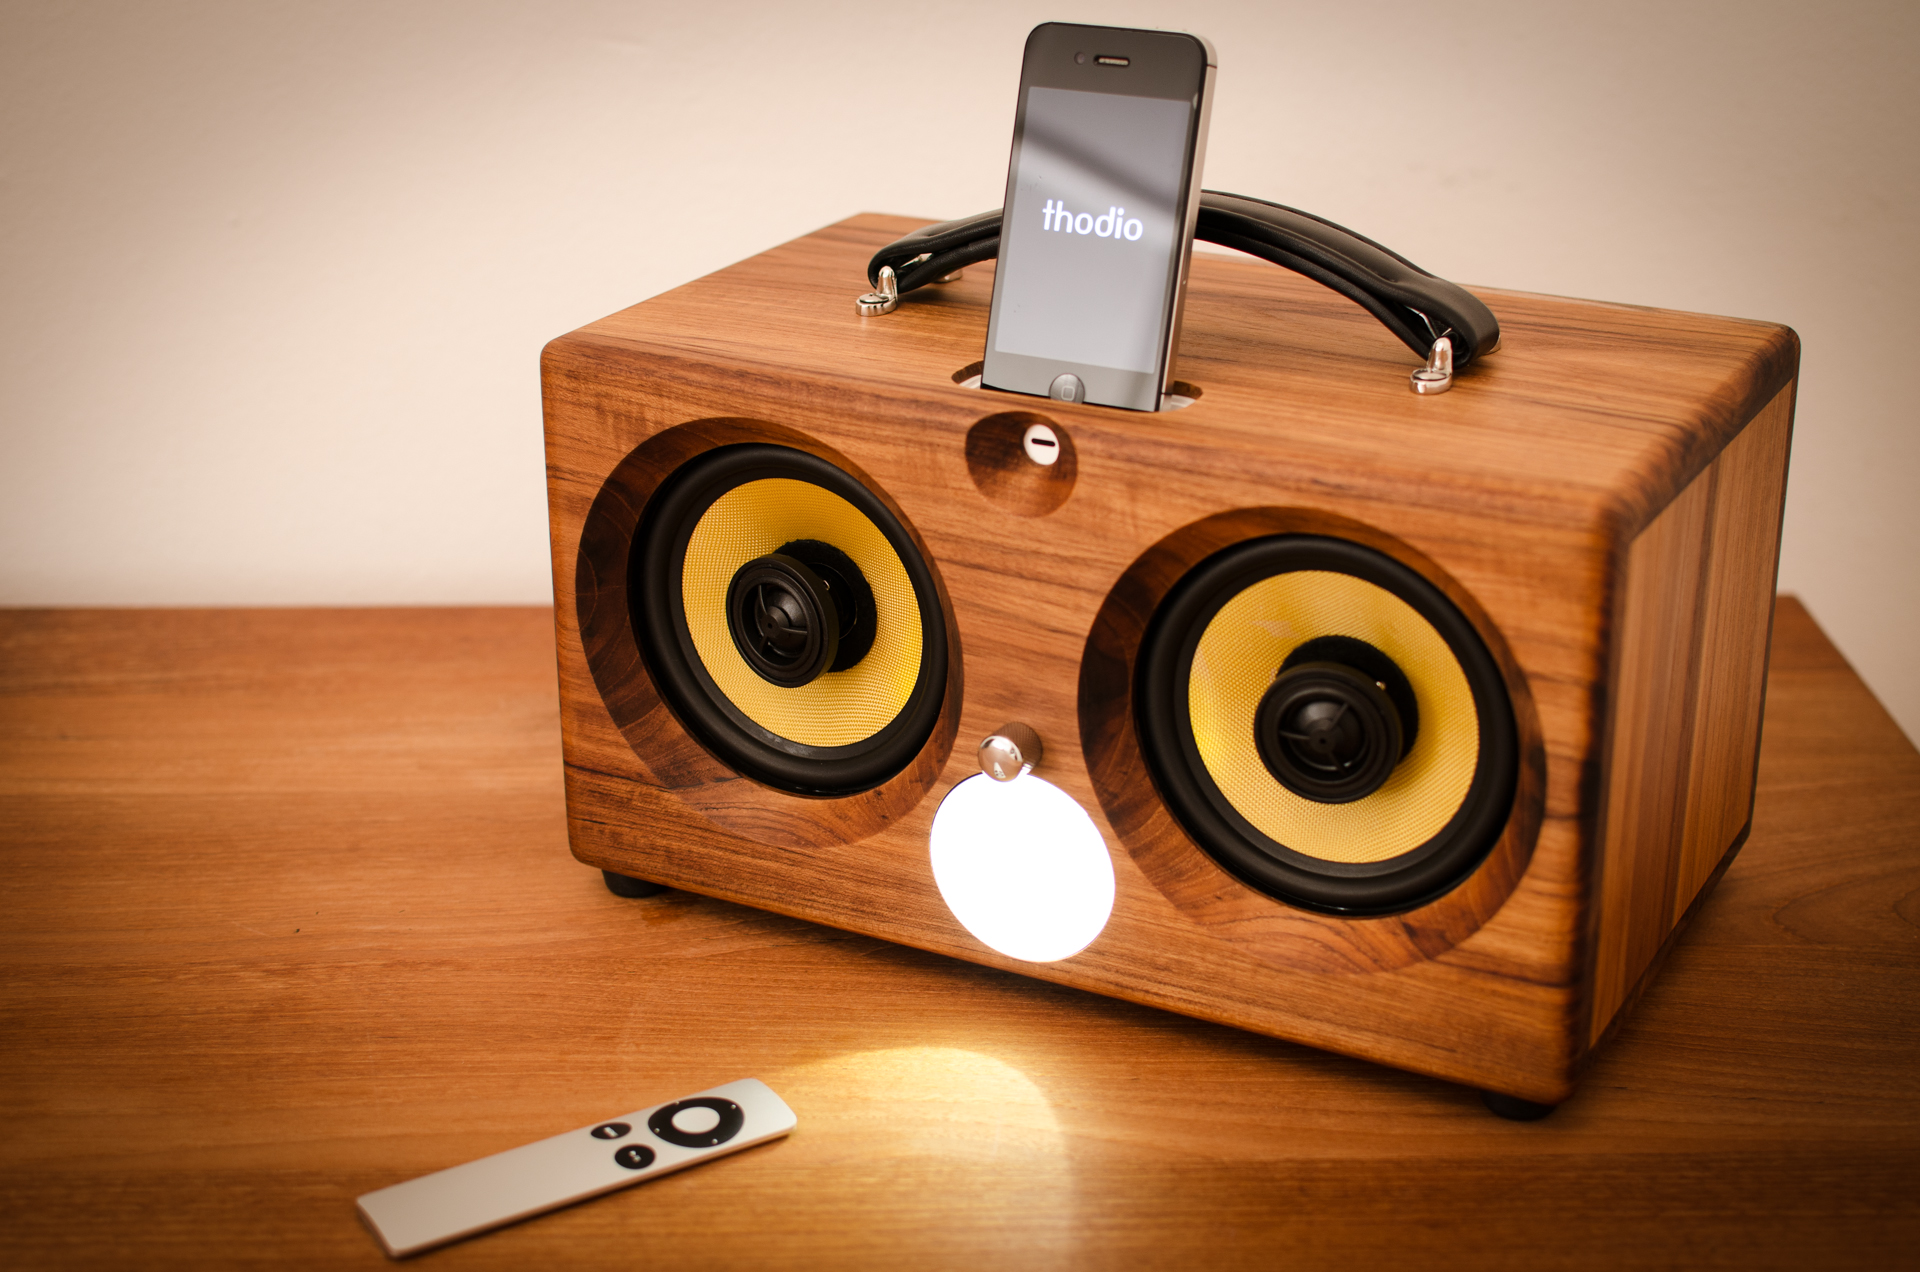 The Best Wireless Speakers Review introducing the new iBox...